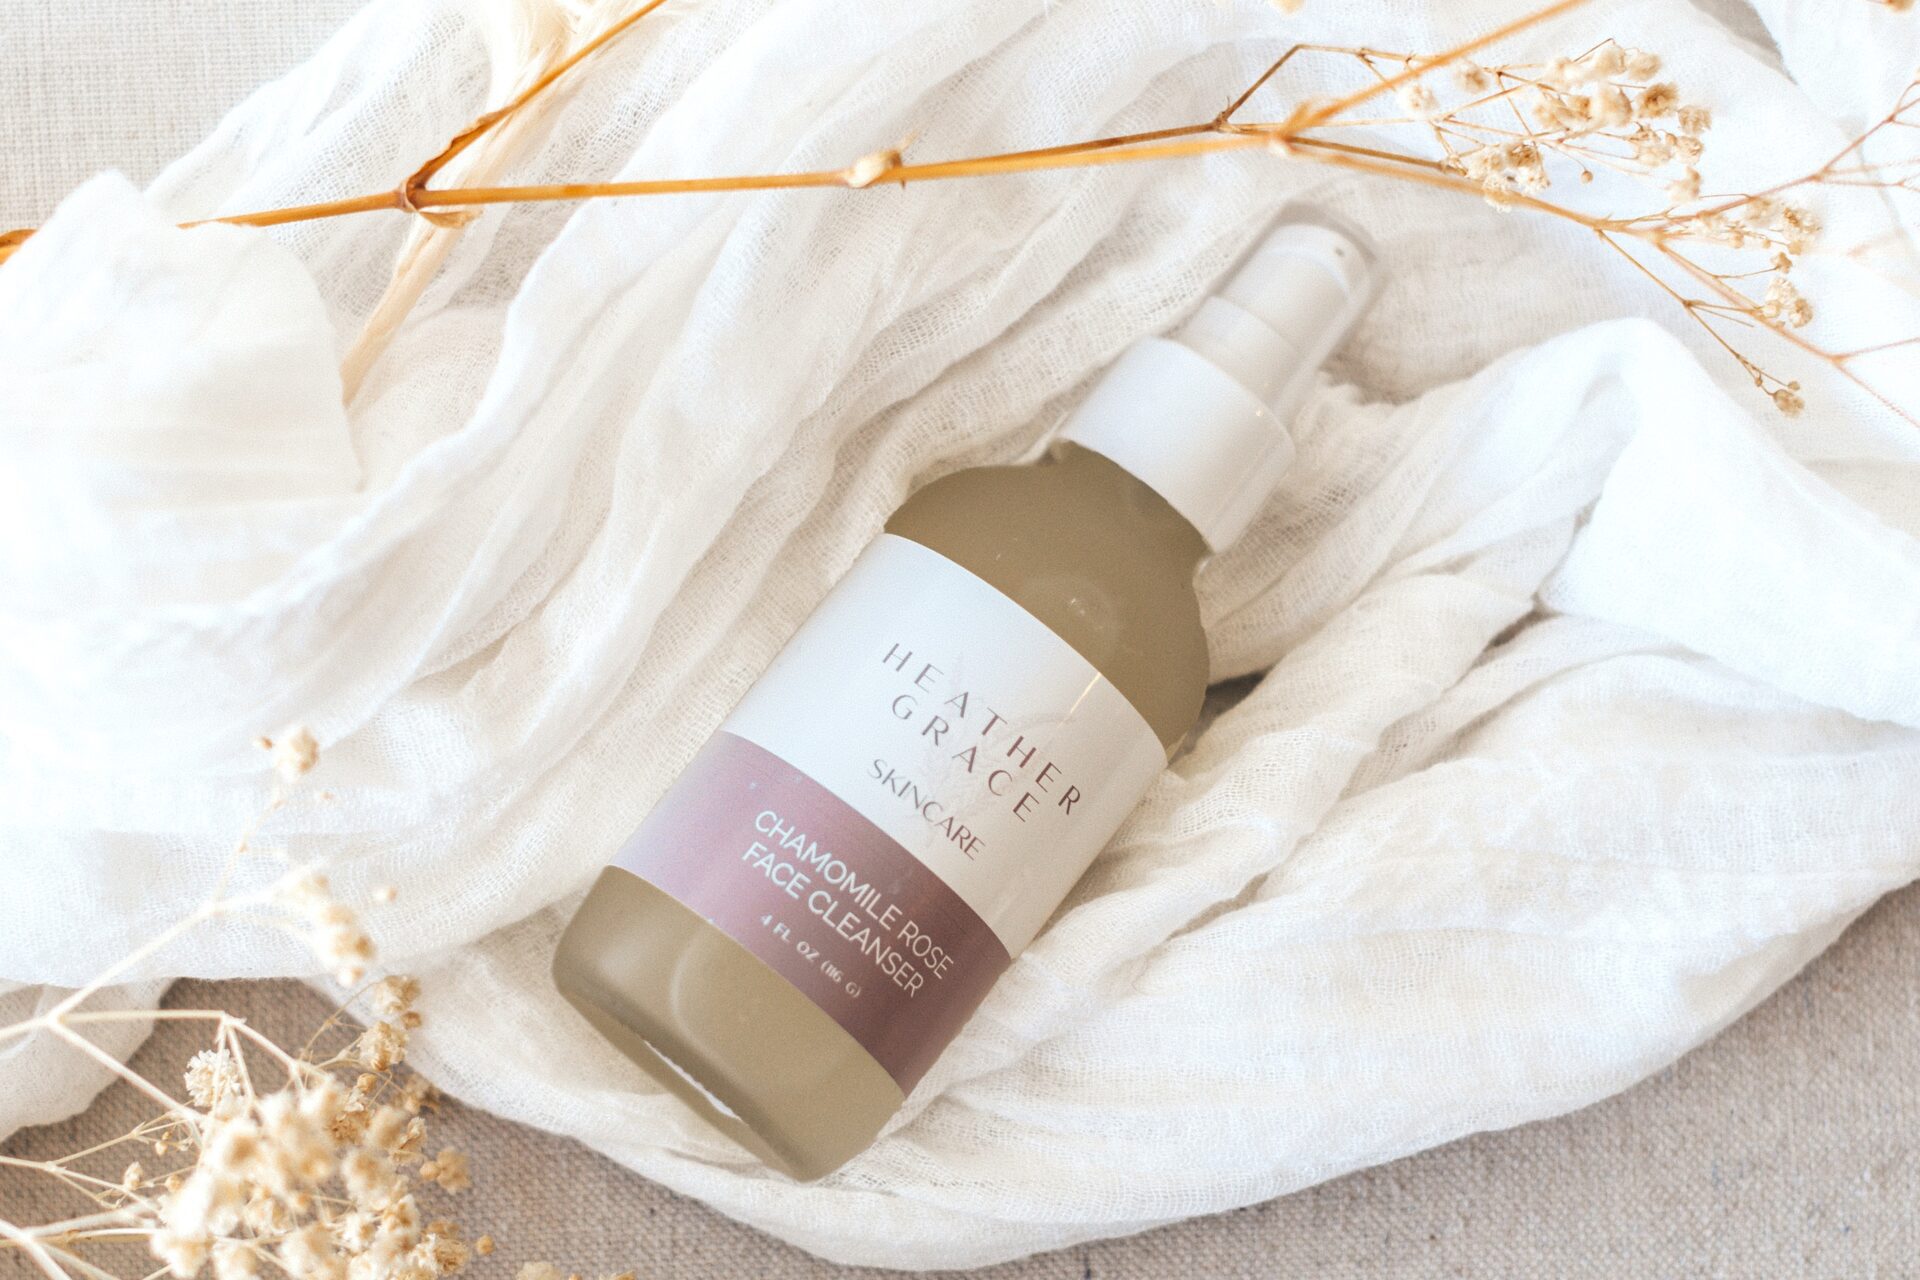 A bottle of Heather Grace Chamomile Rose Face Cleanser sits atop a crinkled white fabric, accompanied by delicate dried botanicals. The cleanser's label is elegant and clear, with a serene and natural aesthetic in the composition.